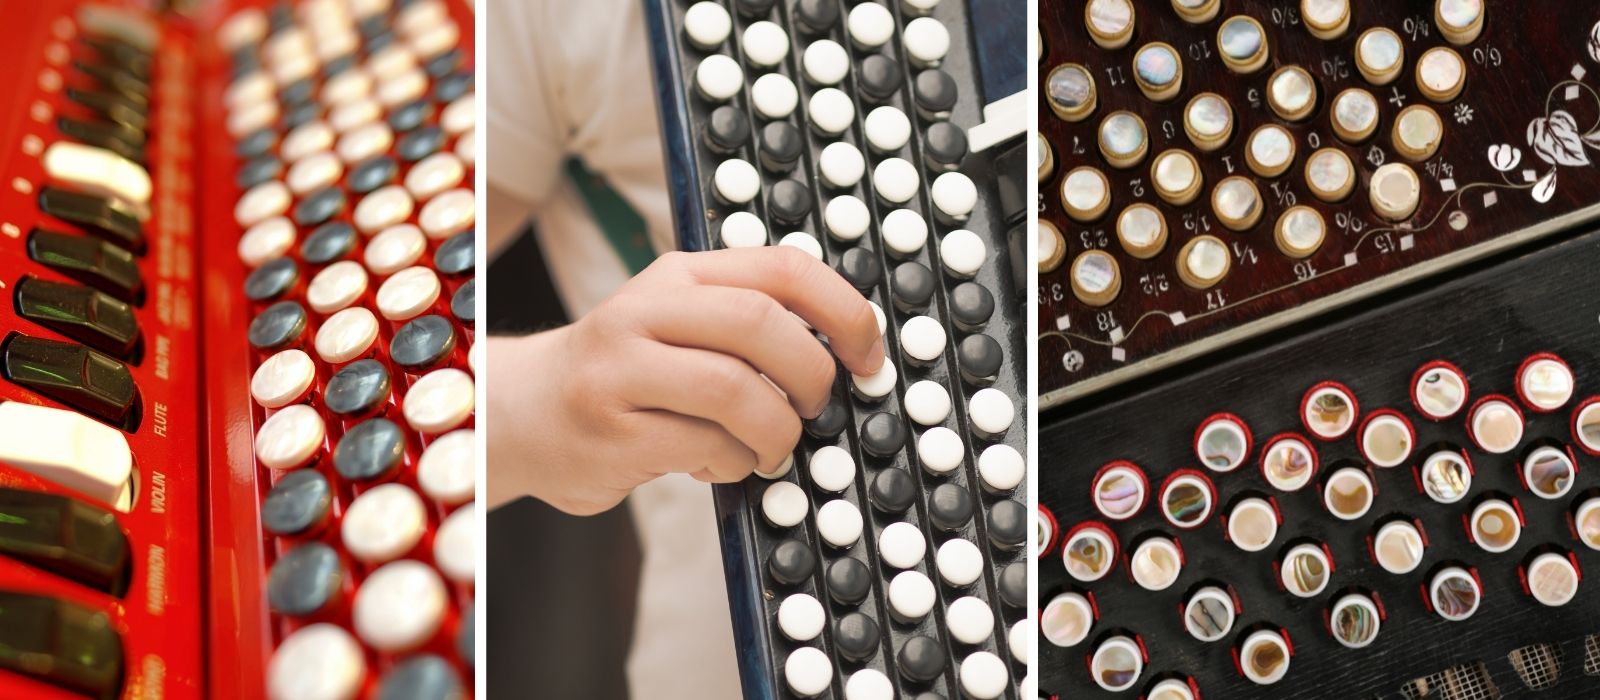 Button accordions, what are they and how are they played?